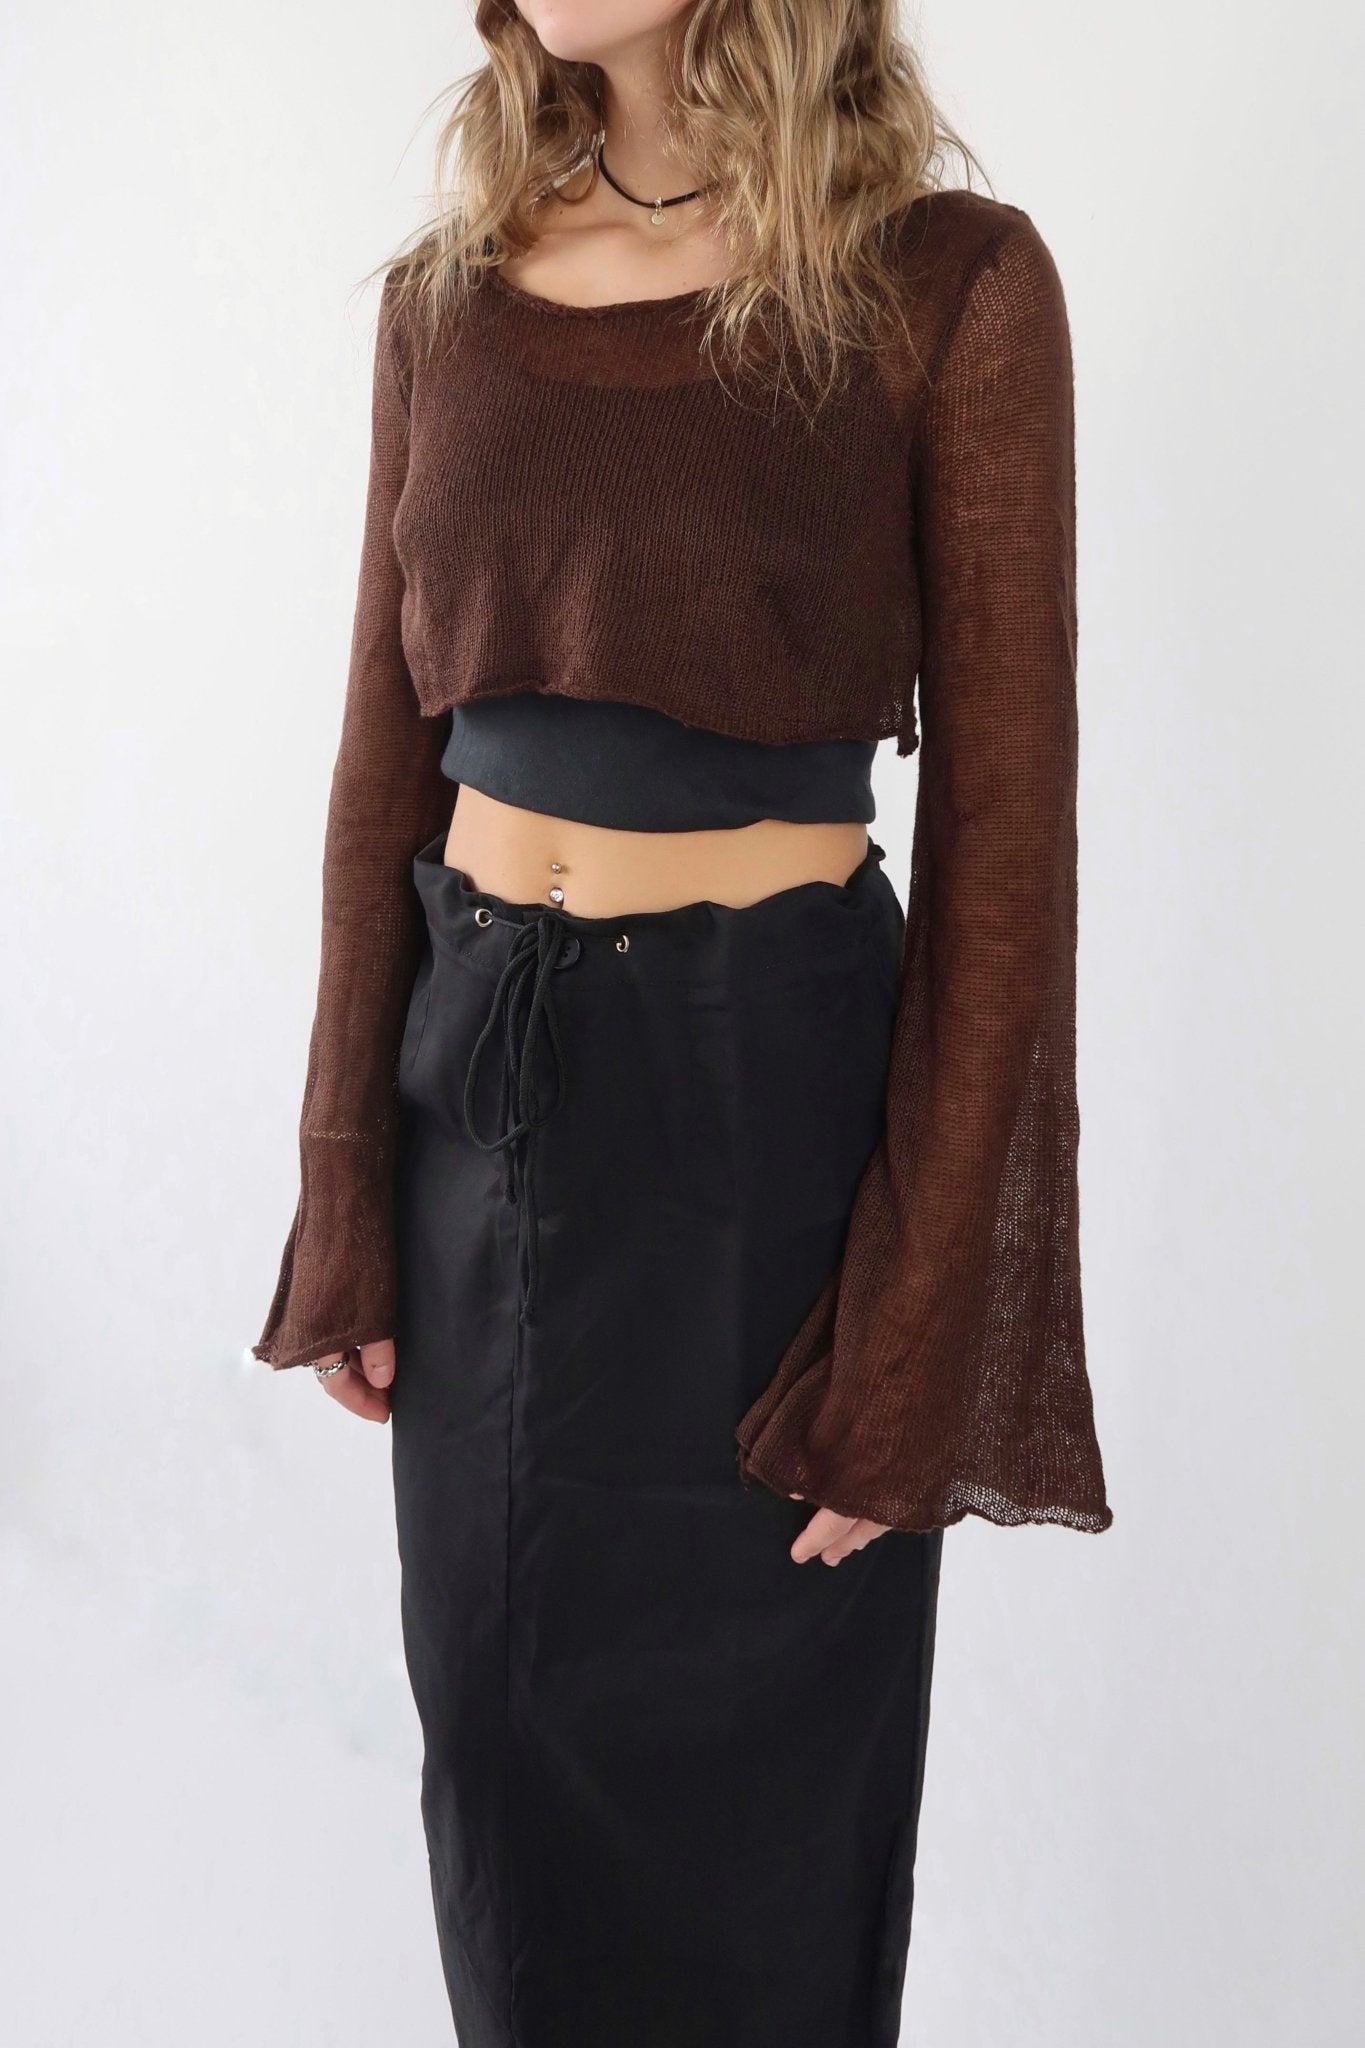 Chocolate retro knit crop top - SCG_COLLECTIONSsweater